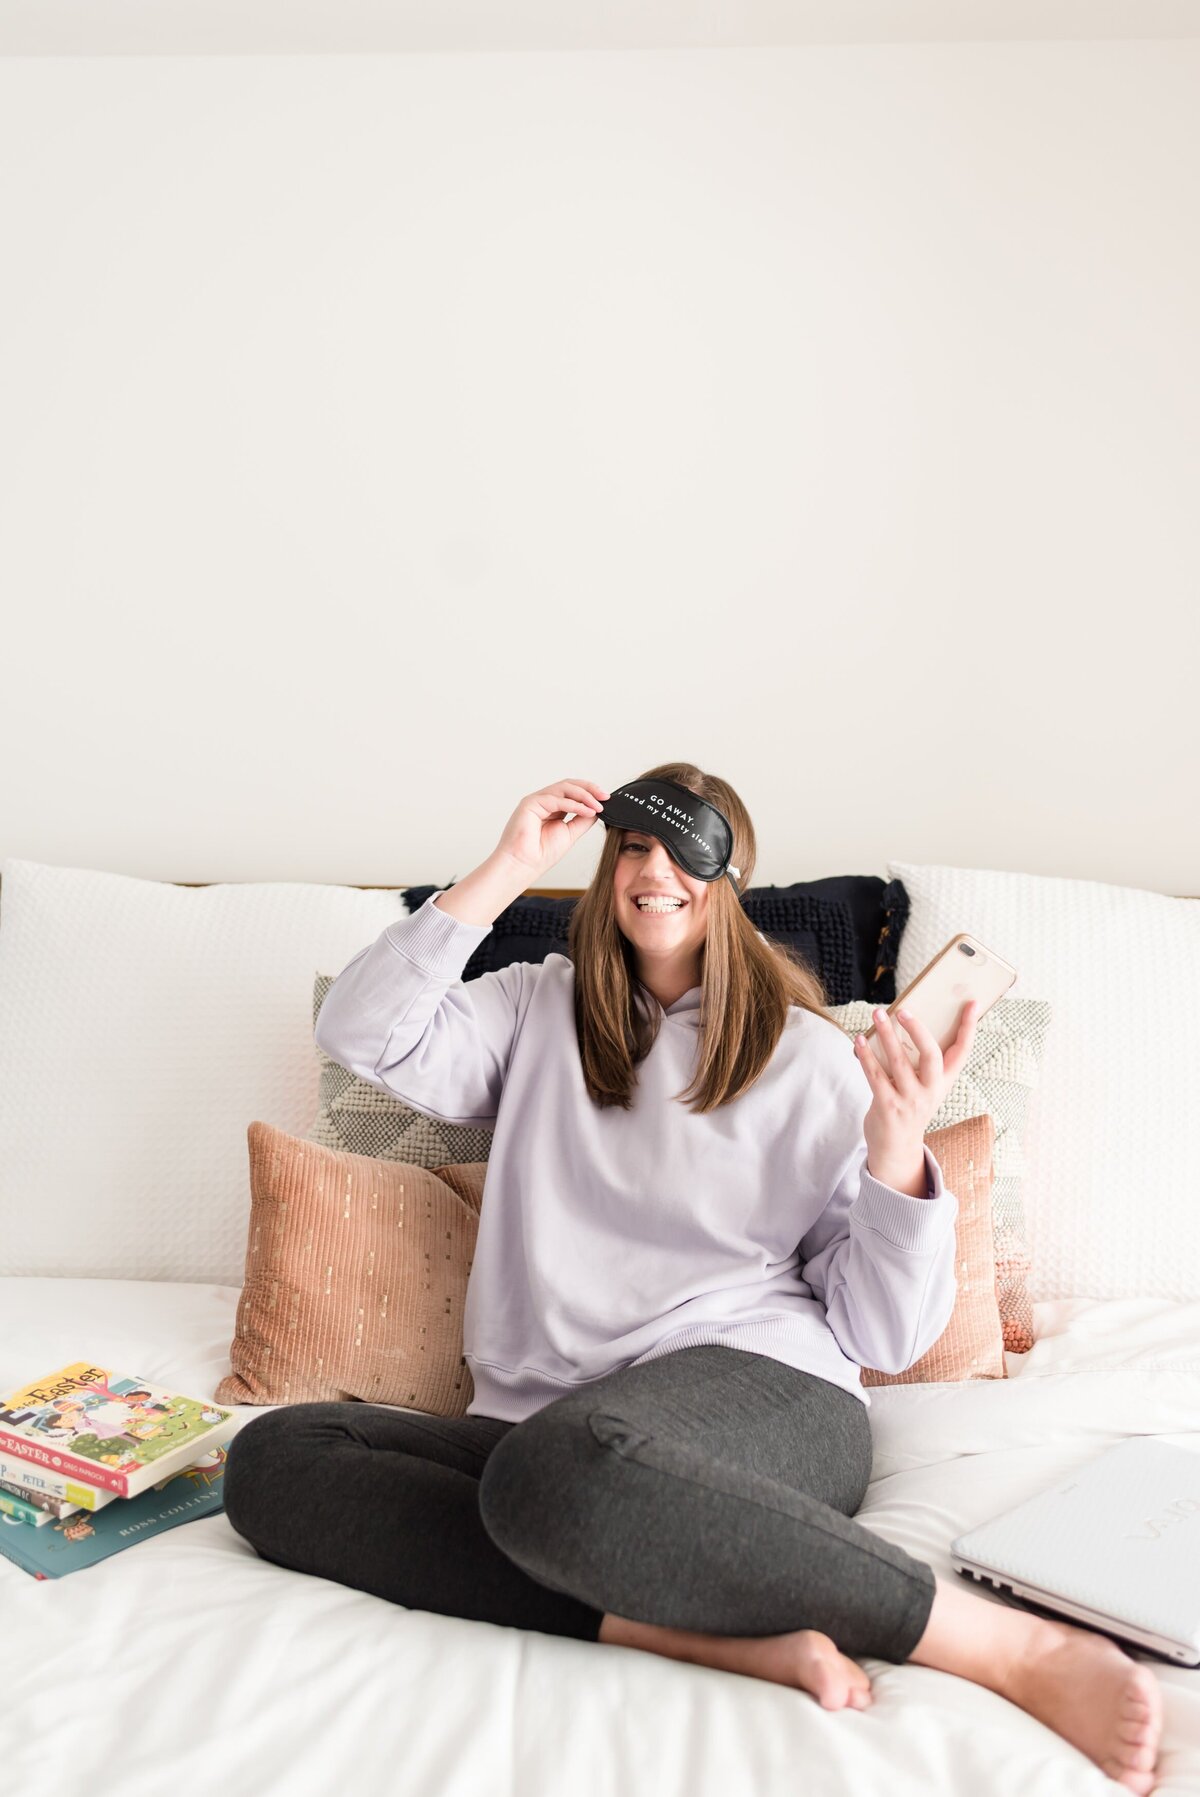 Fun photo of a Nashville business owner with an iphone in one hand and her other hand pulling up a sleeping mask from her eyes